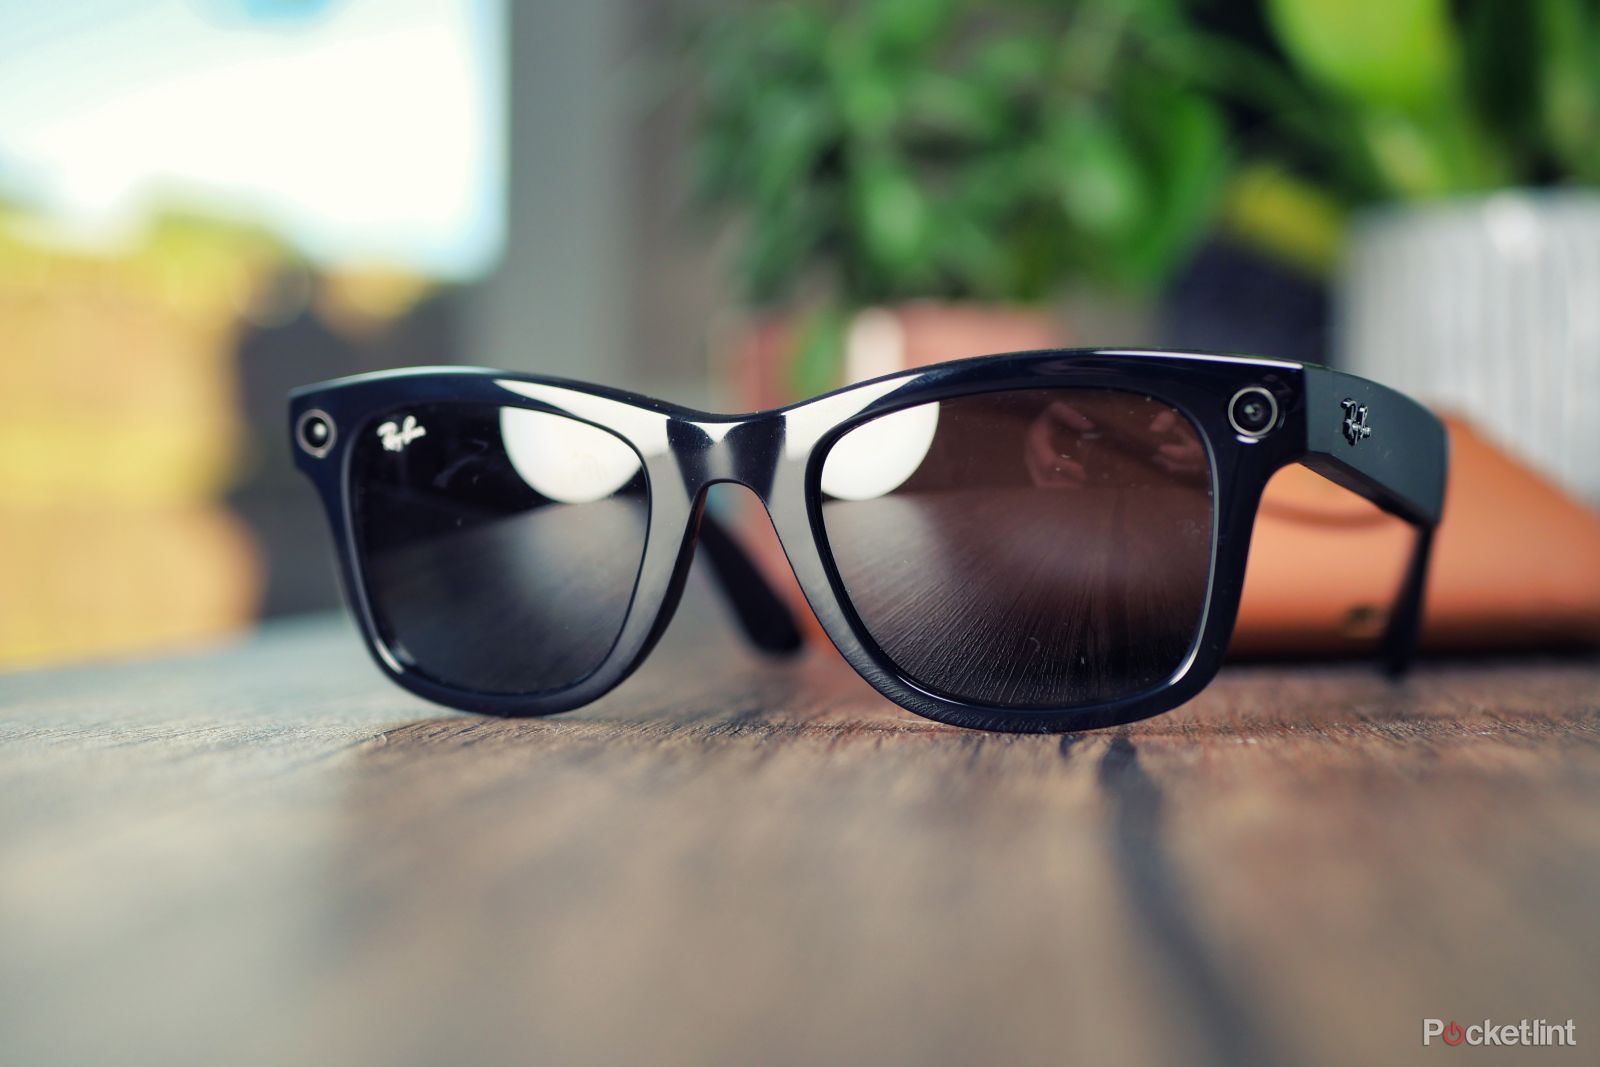 Meta Ray-Ban Smart Glasses review: A glimpse of the future